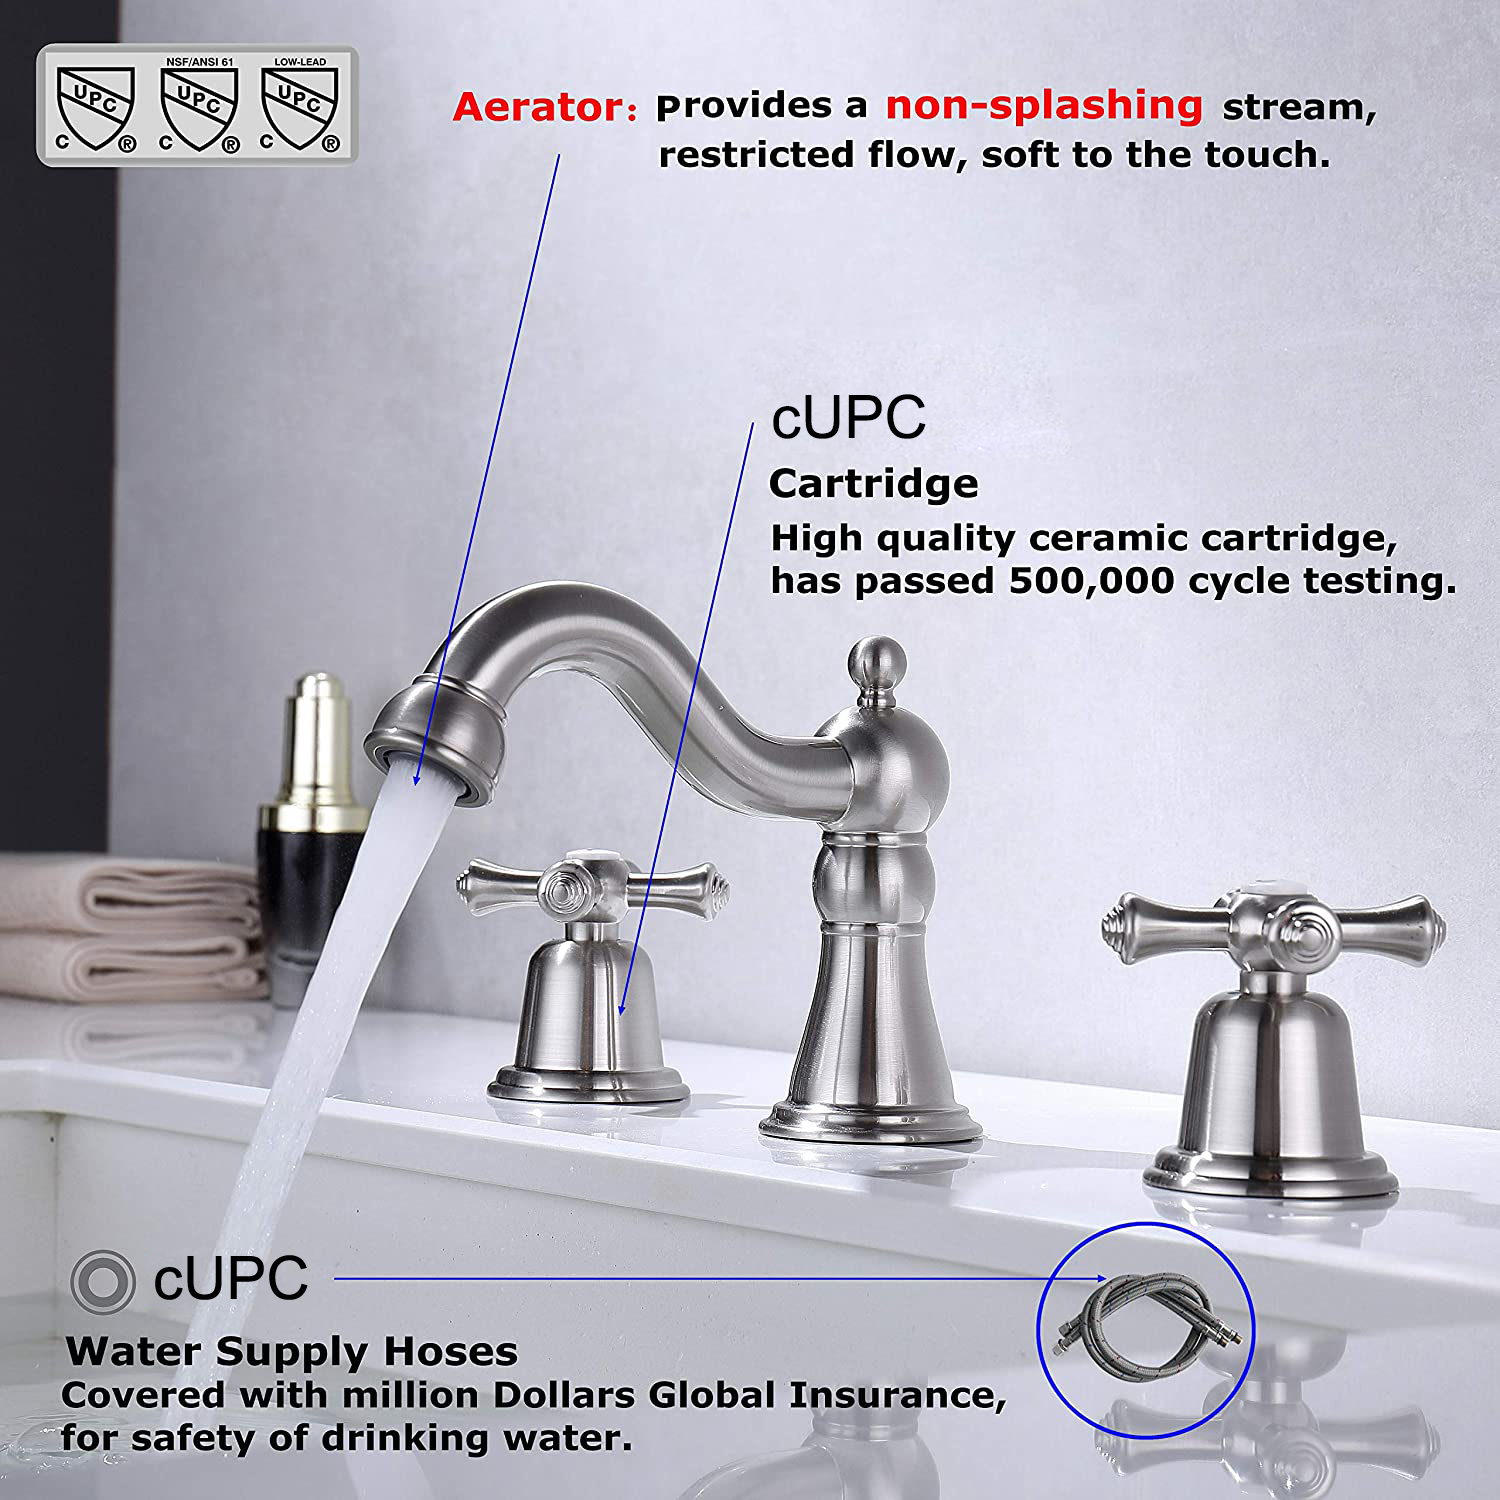 Aquacubic Modern Hot Selling 8 Inch Widespread Assembly Basin Faucet Tap Deck Mounted Faucets for Bathroom Tap